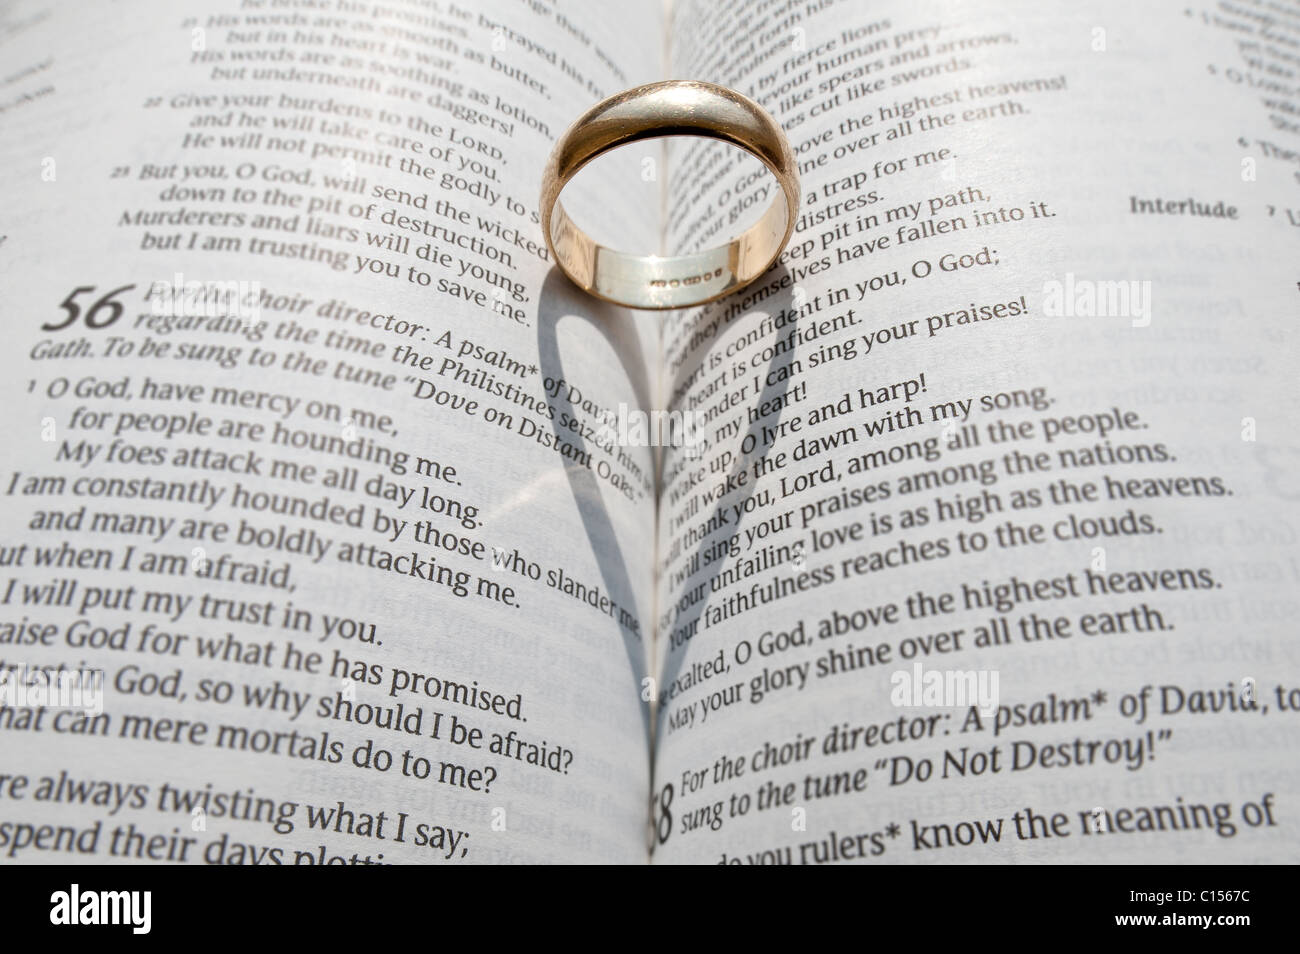 A wedding ring casting a shadow on the open pages of an open religious book  Stock Photo - Alamy